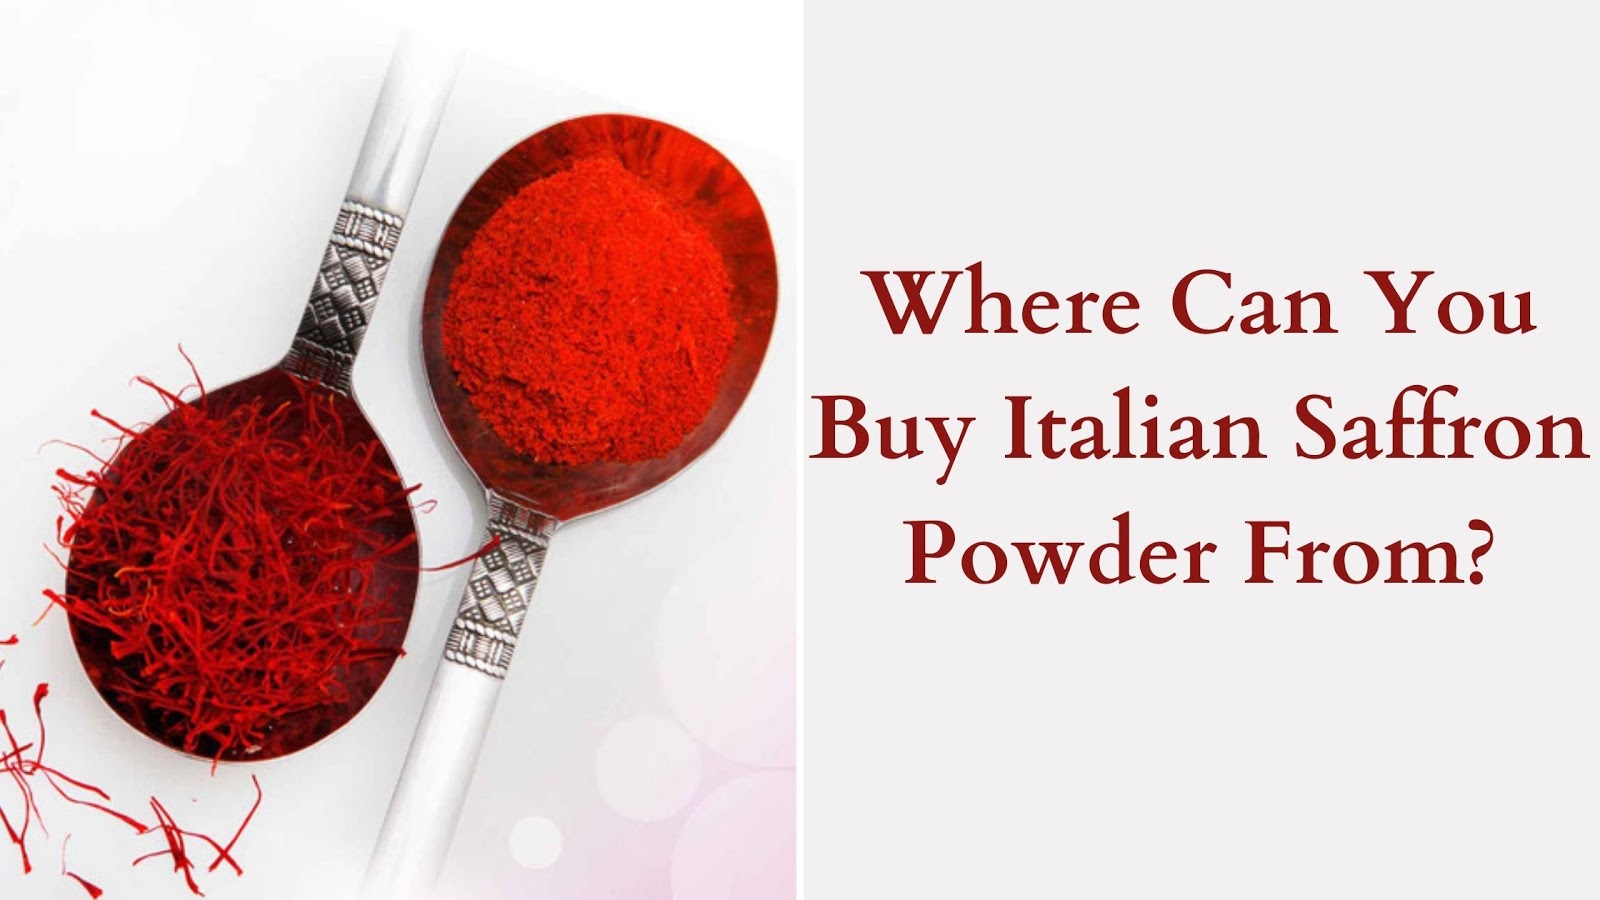 Where Can You Buy Italian Saffron Powder From?